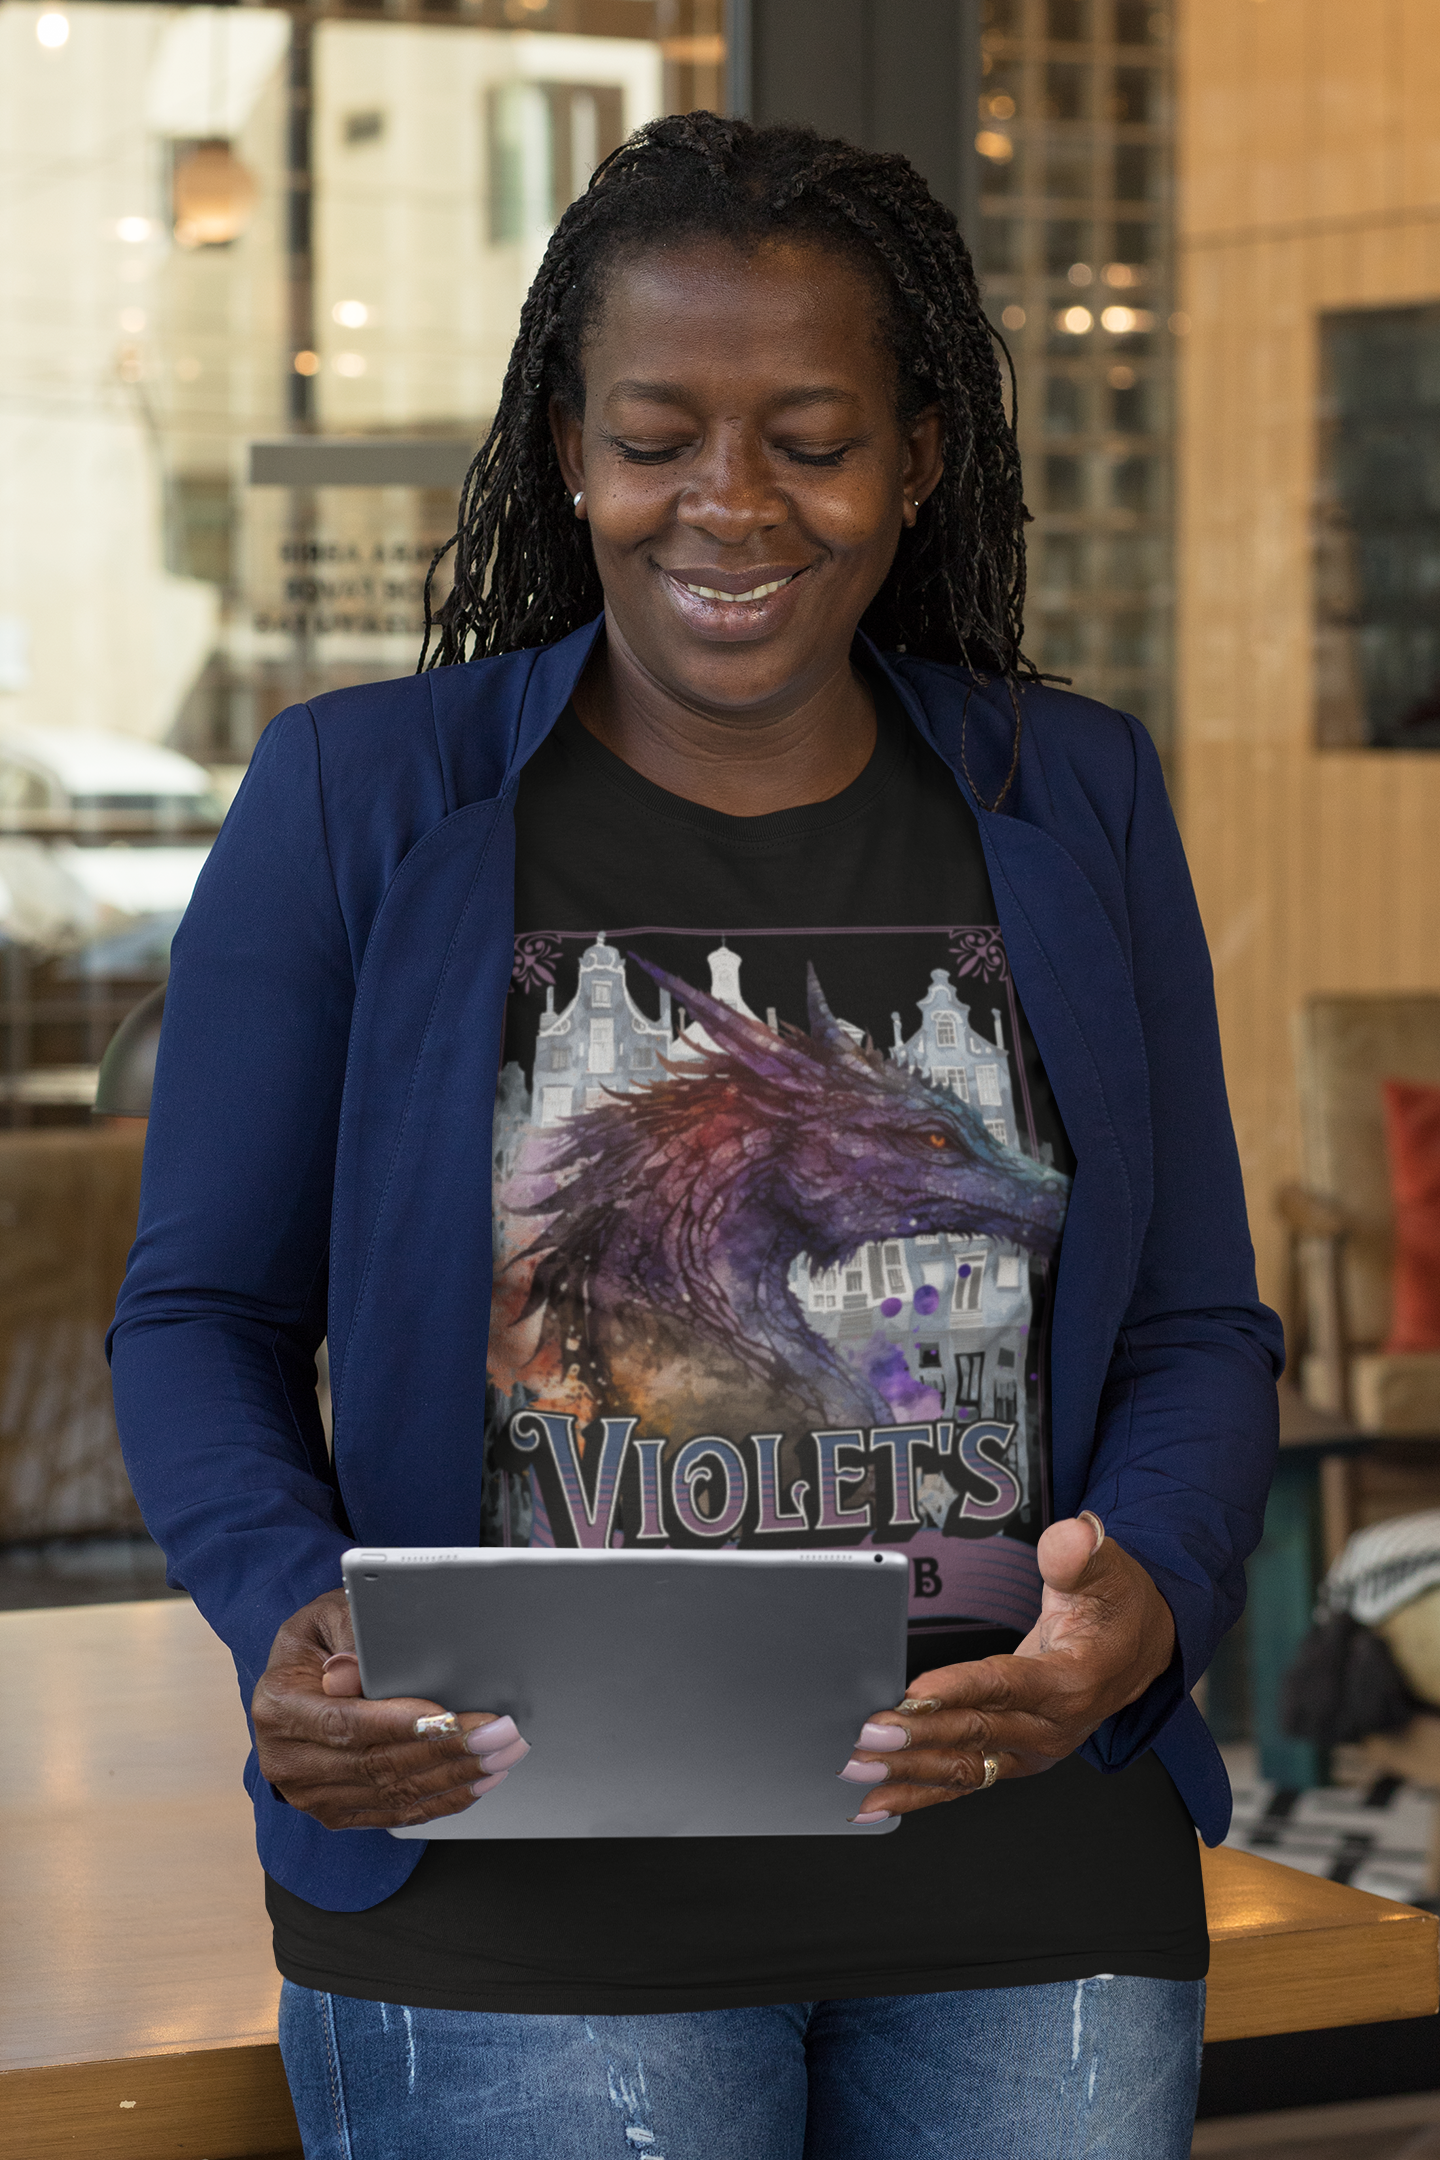 Violet's Scribe Club Tee - Officially Licensed Fourth Wing by Rebecca Yarros Merchandise